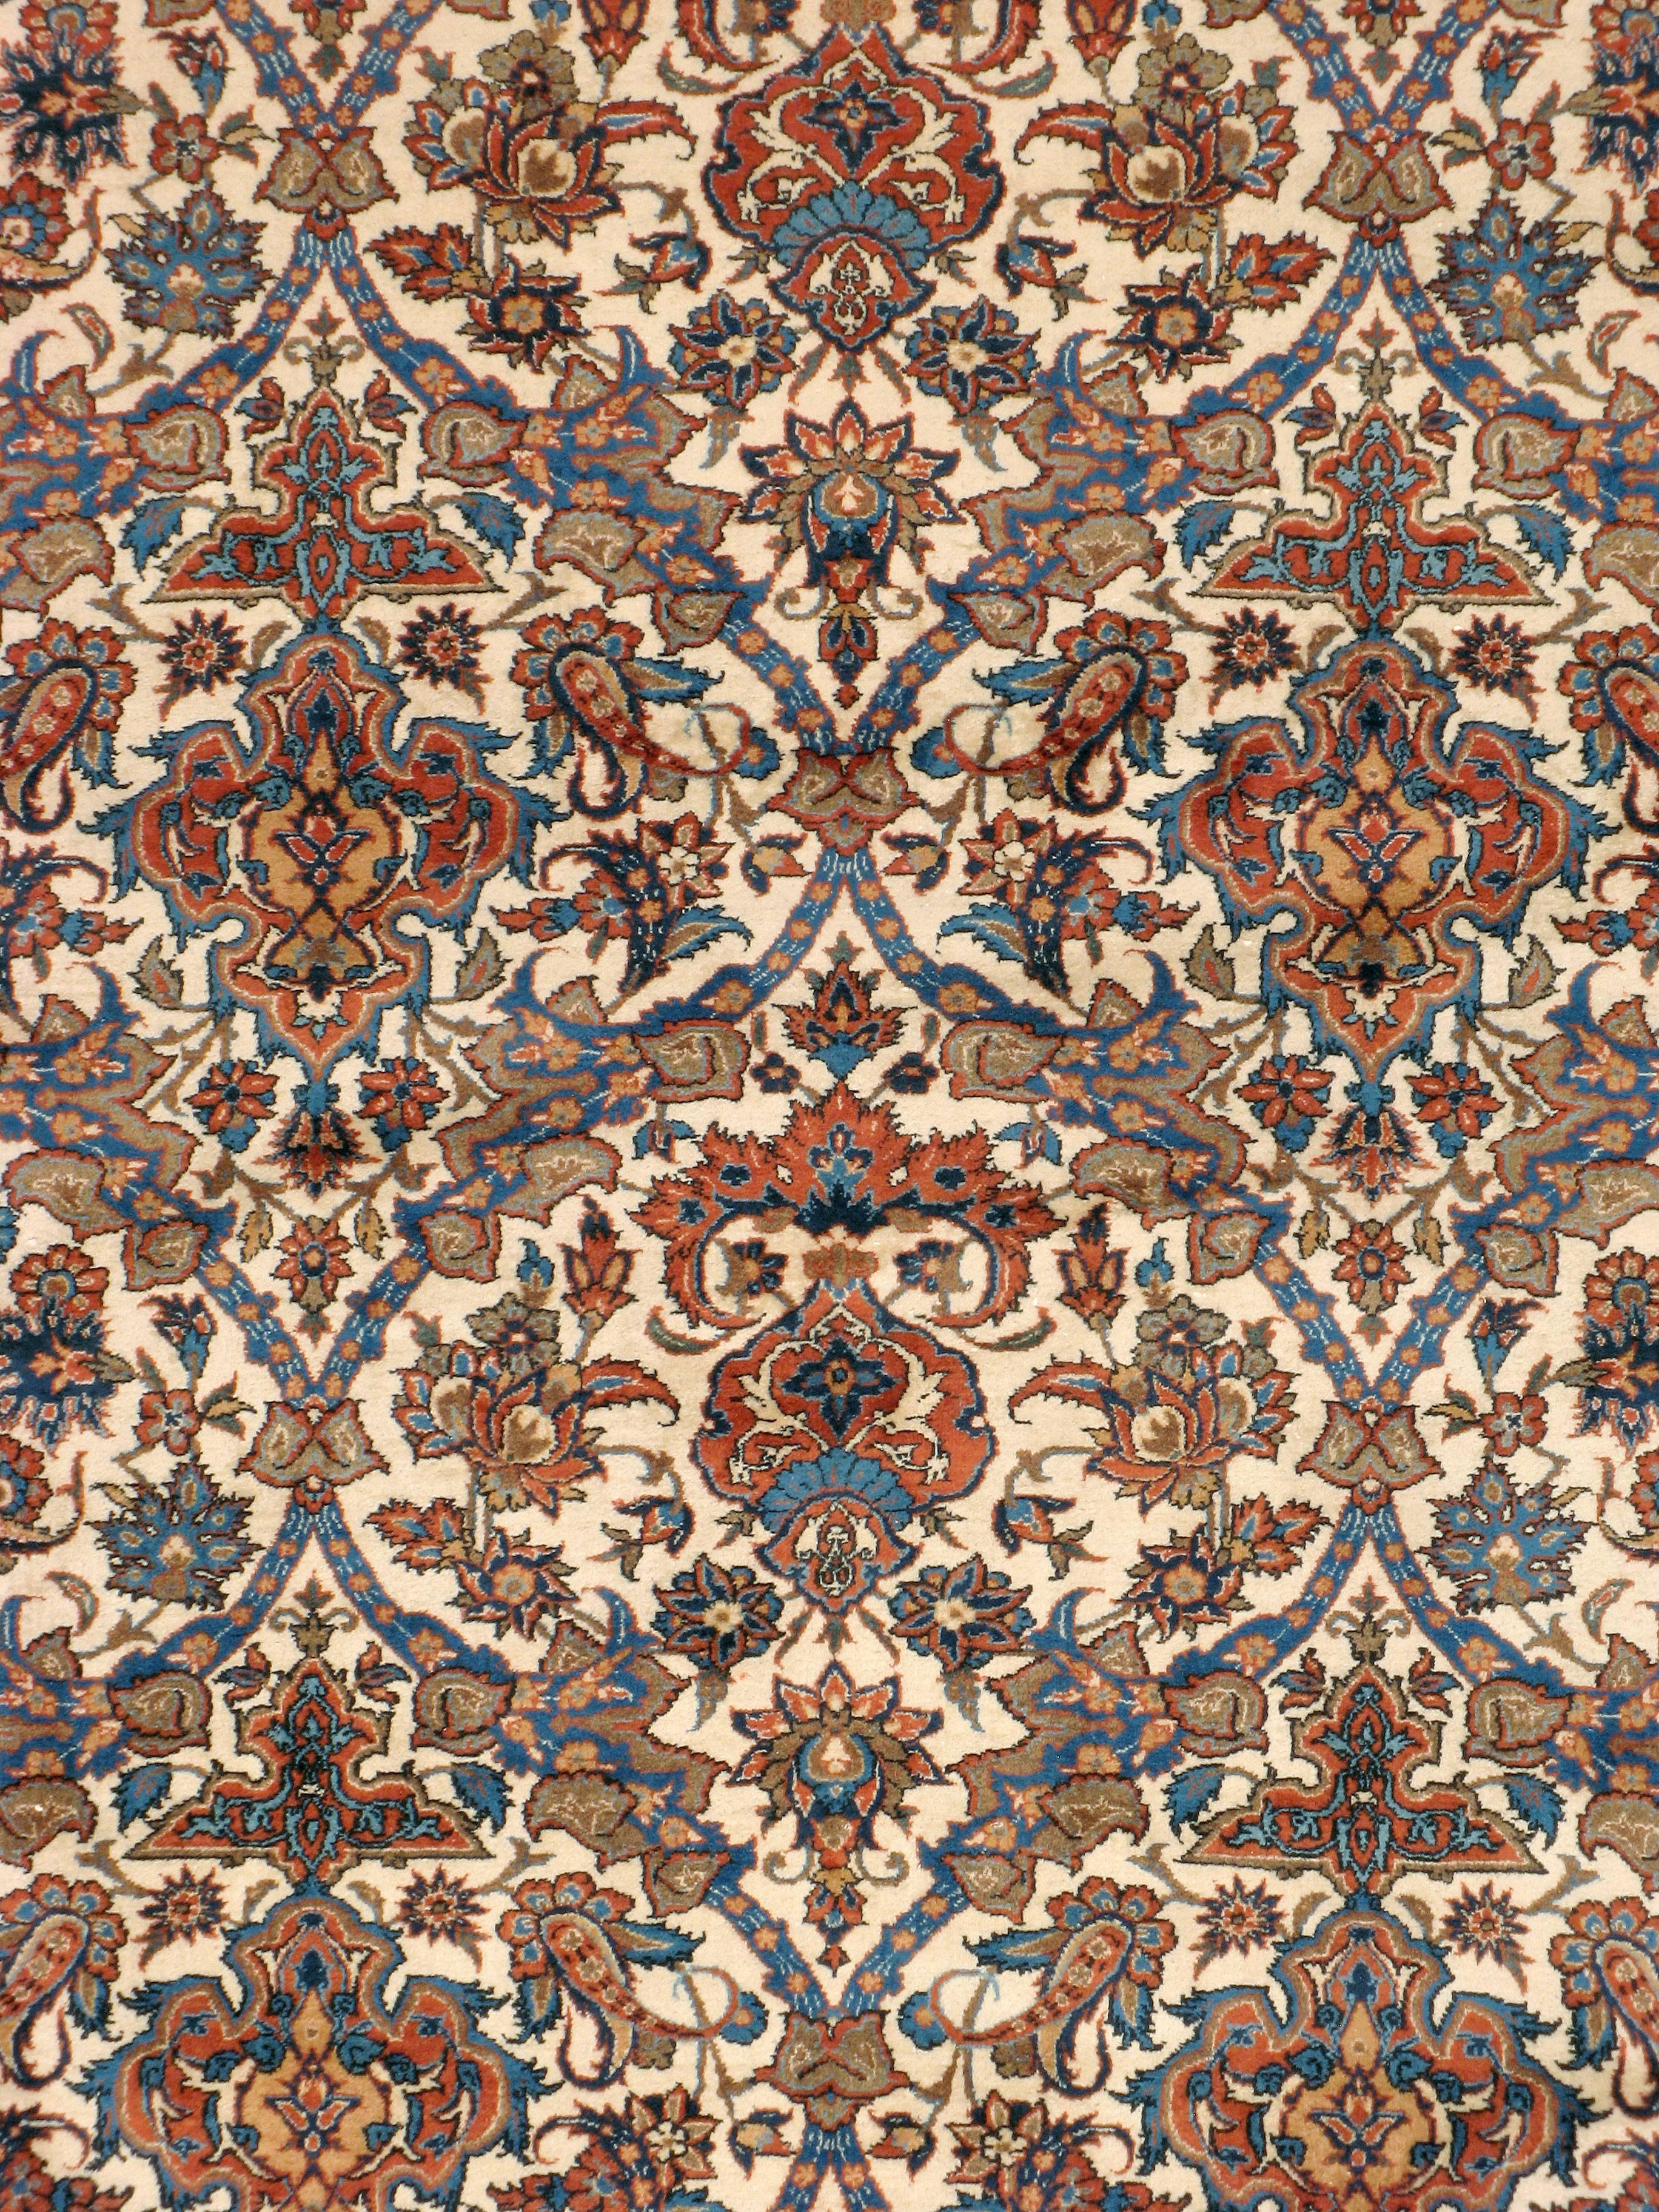 A vintage Persian Isfahan carpet from the mid-20th century with an intricate all-over motif. The pattern is symmetrical in one direction with blue, red and orange hues over an ivory background, bordered by a complex vine and scroll design.